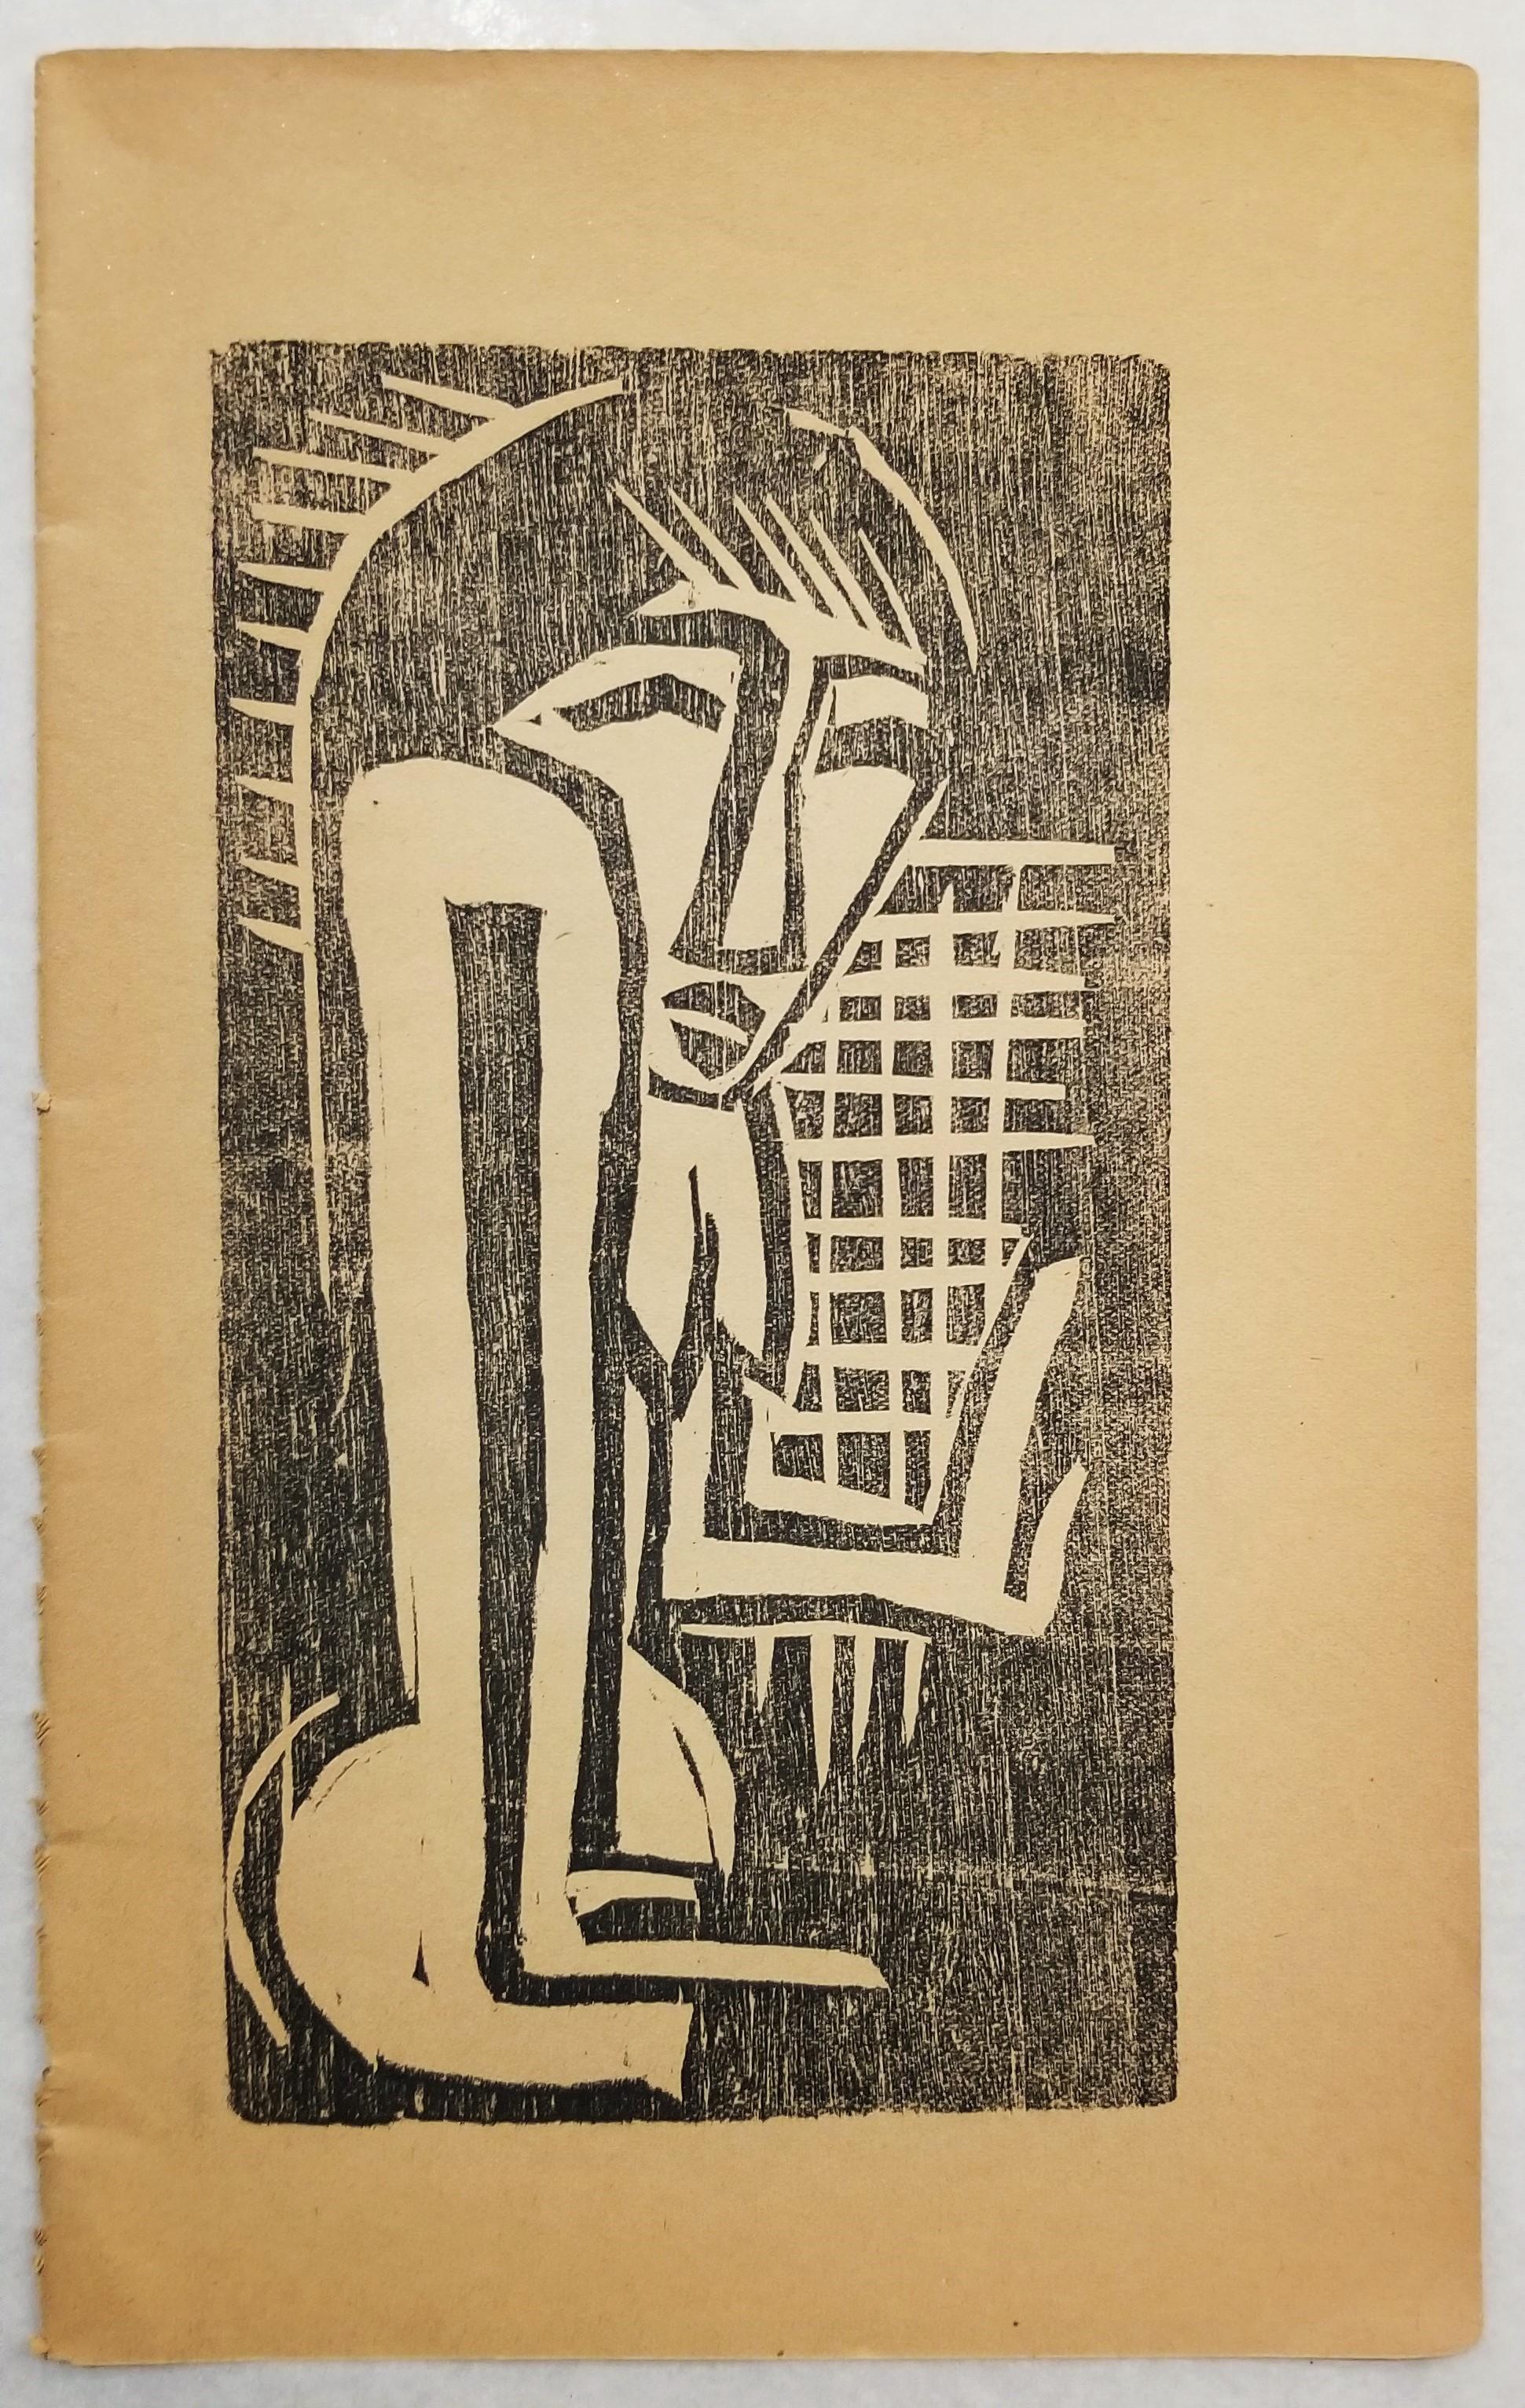 Stehendes nacktes Mädchen im Profil (Standing Naked Girl in Profile) /// Woodcut - Expressionist Print by Karl Schmidt-Rottluff